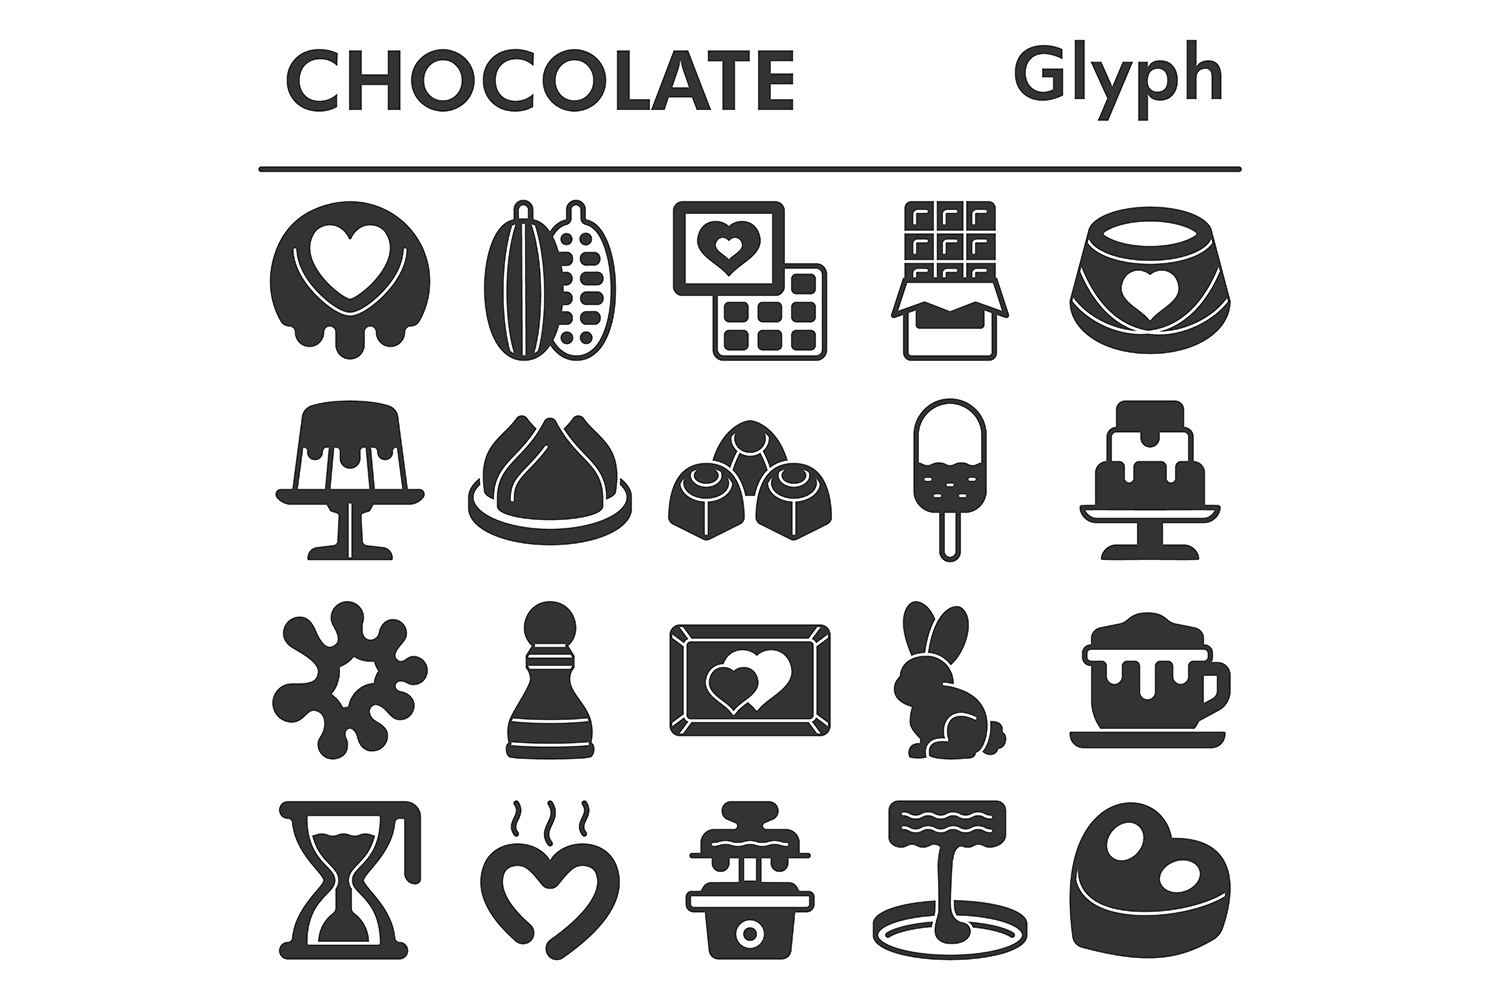 Chocolate icons set, glyph style pinterest preview image.